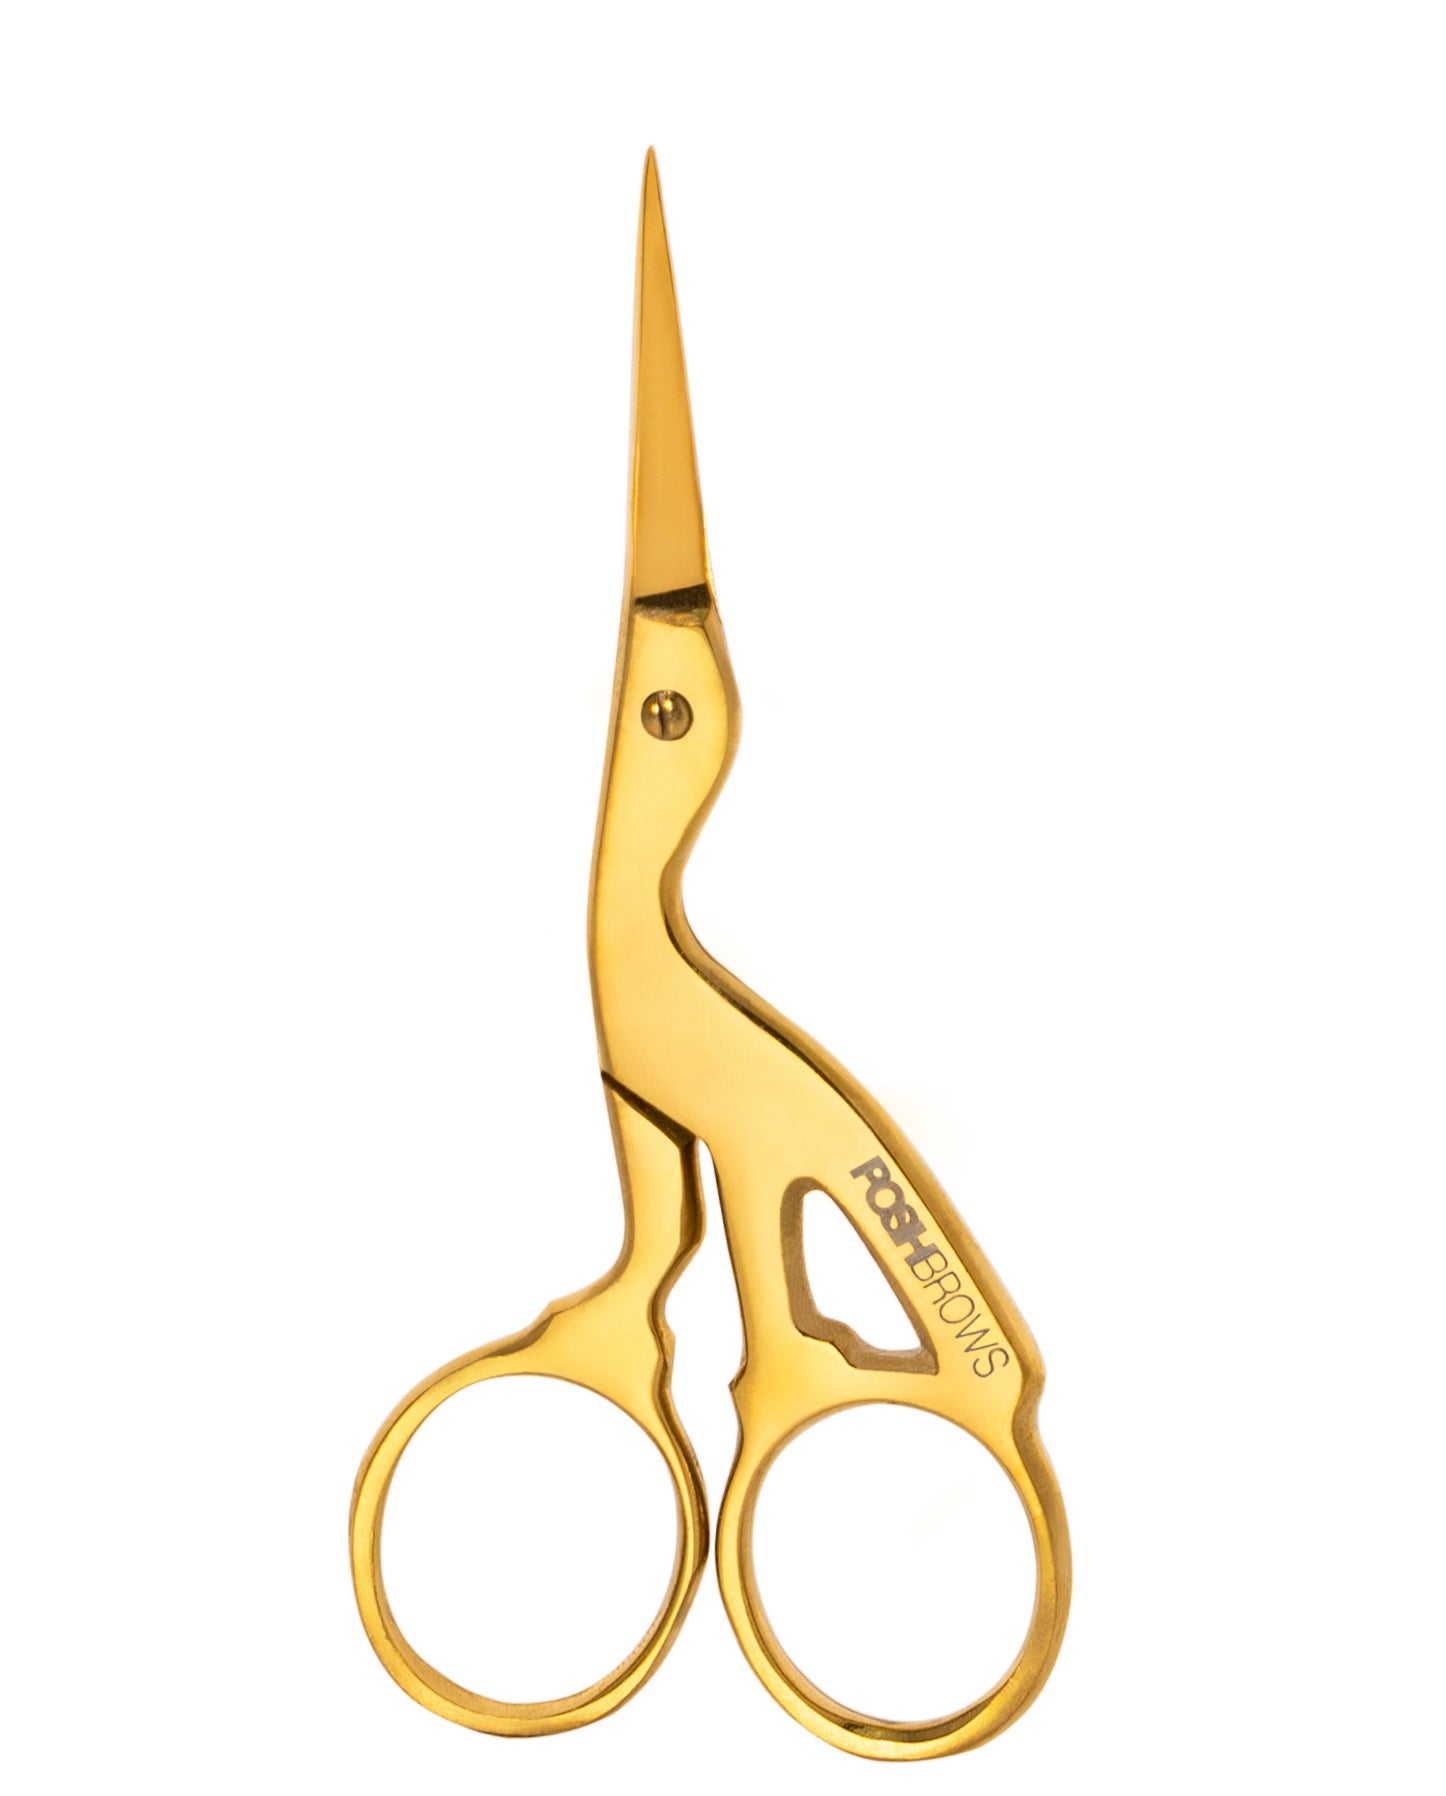 House Brand 4.5' Curved Crown & Gold Scissors with Smooth Blades